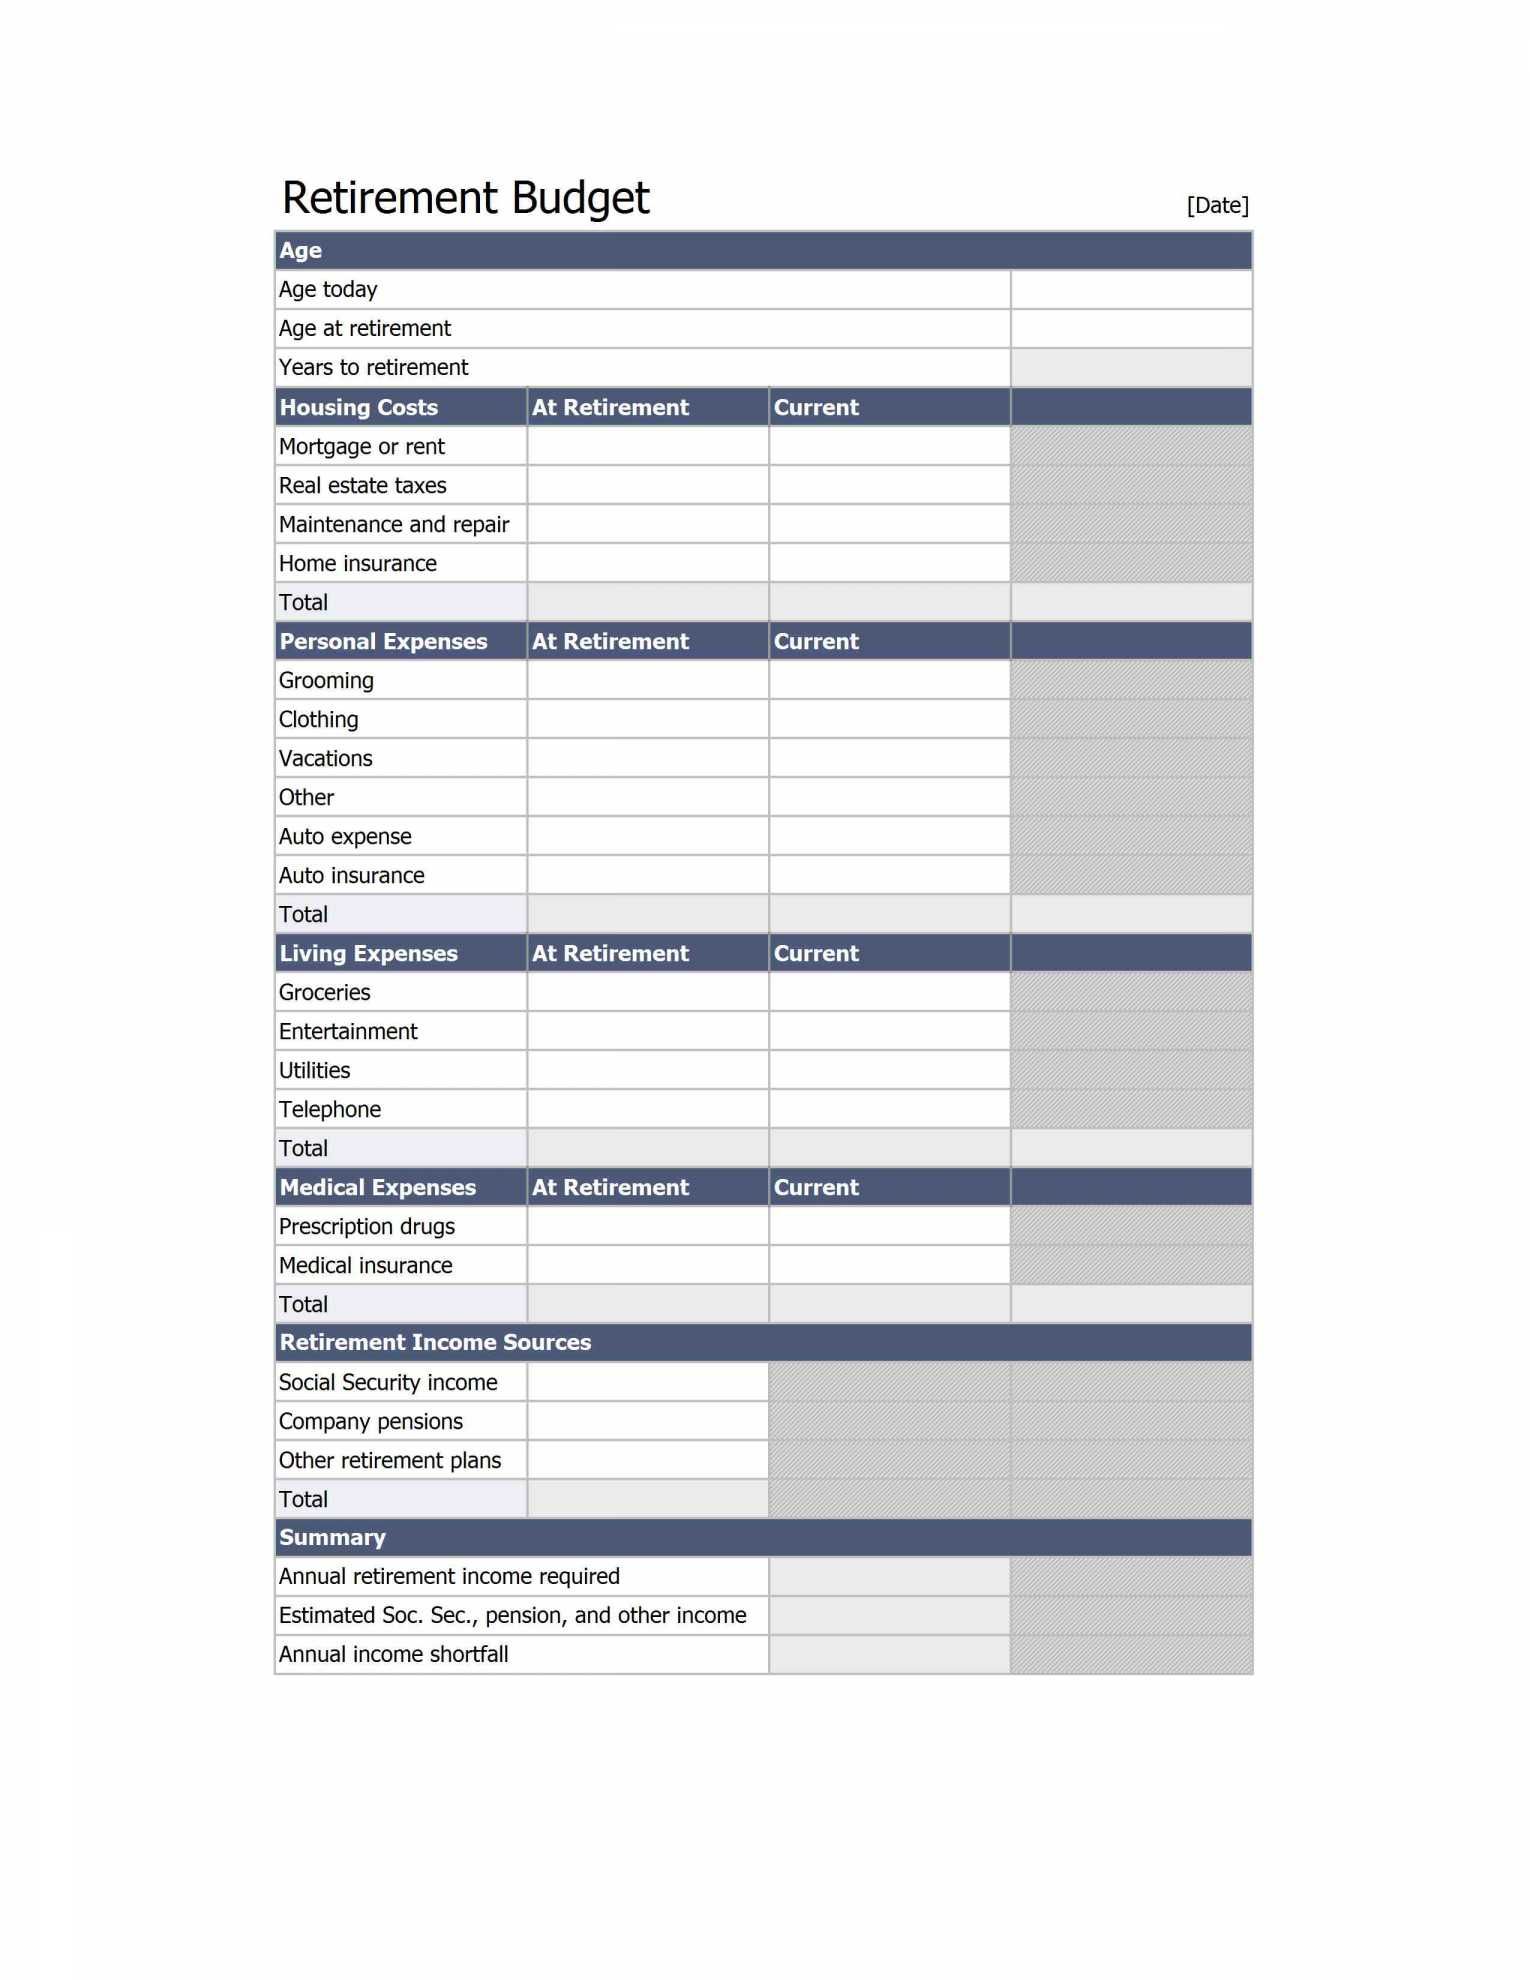 Worksheet to calculate retirement in e free printables worksheet 1530x1980 Retirement worksheet